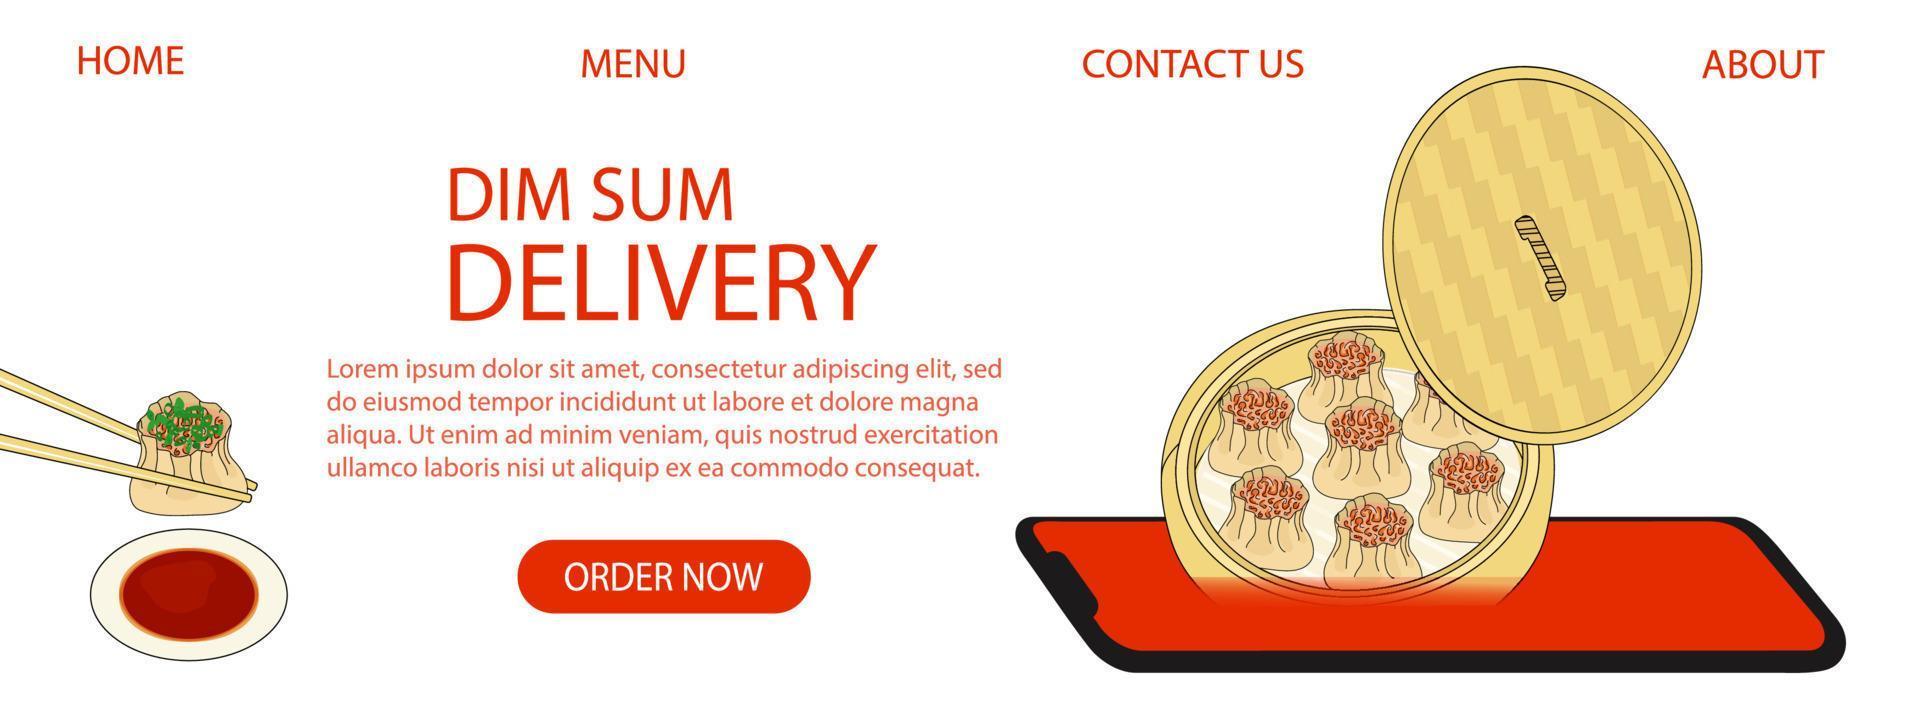 Dim sum delivery landing page template vector illustration